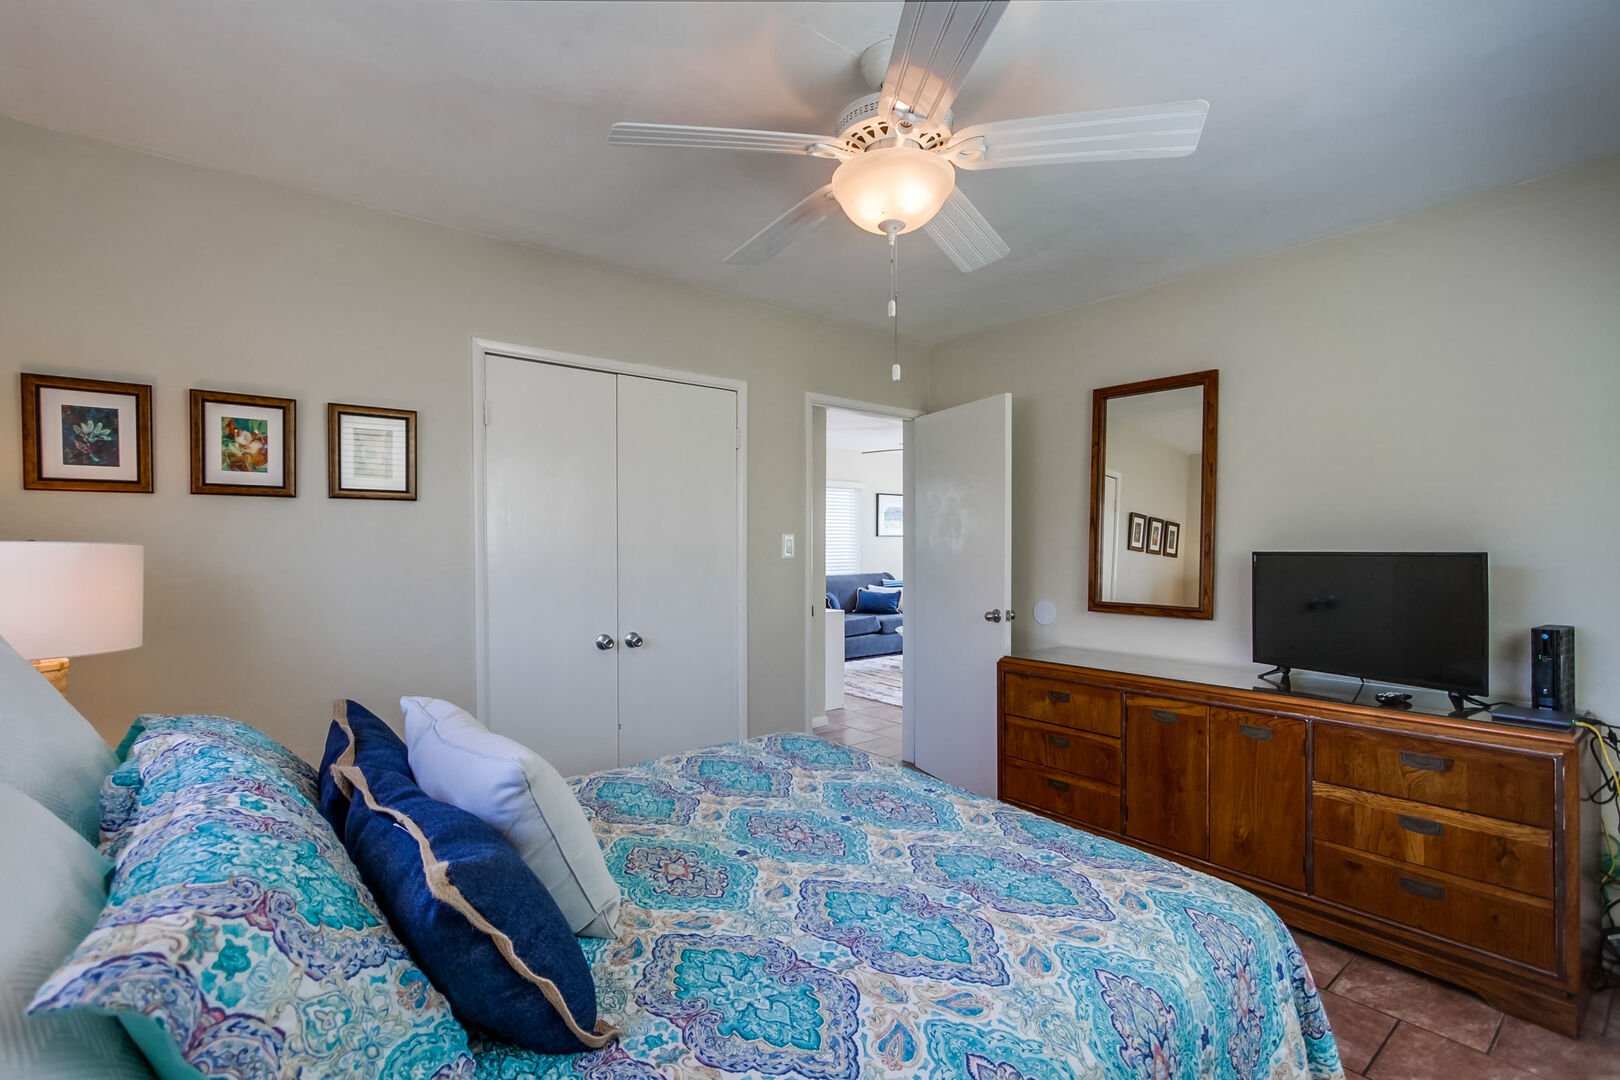 Guest bedroom has ample closet and dresser space, TV and warm sunshine